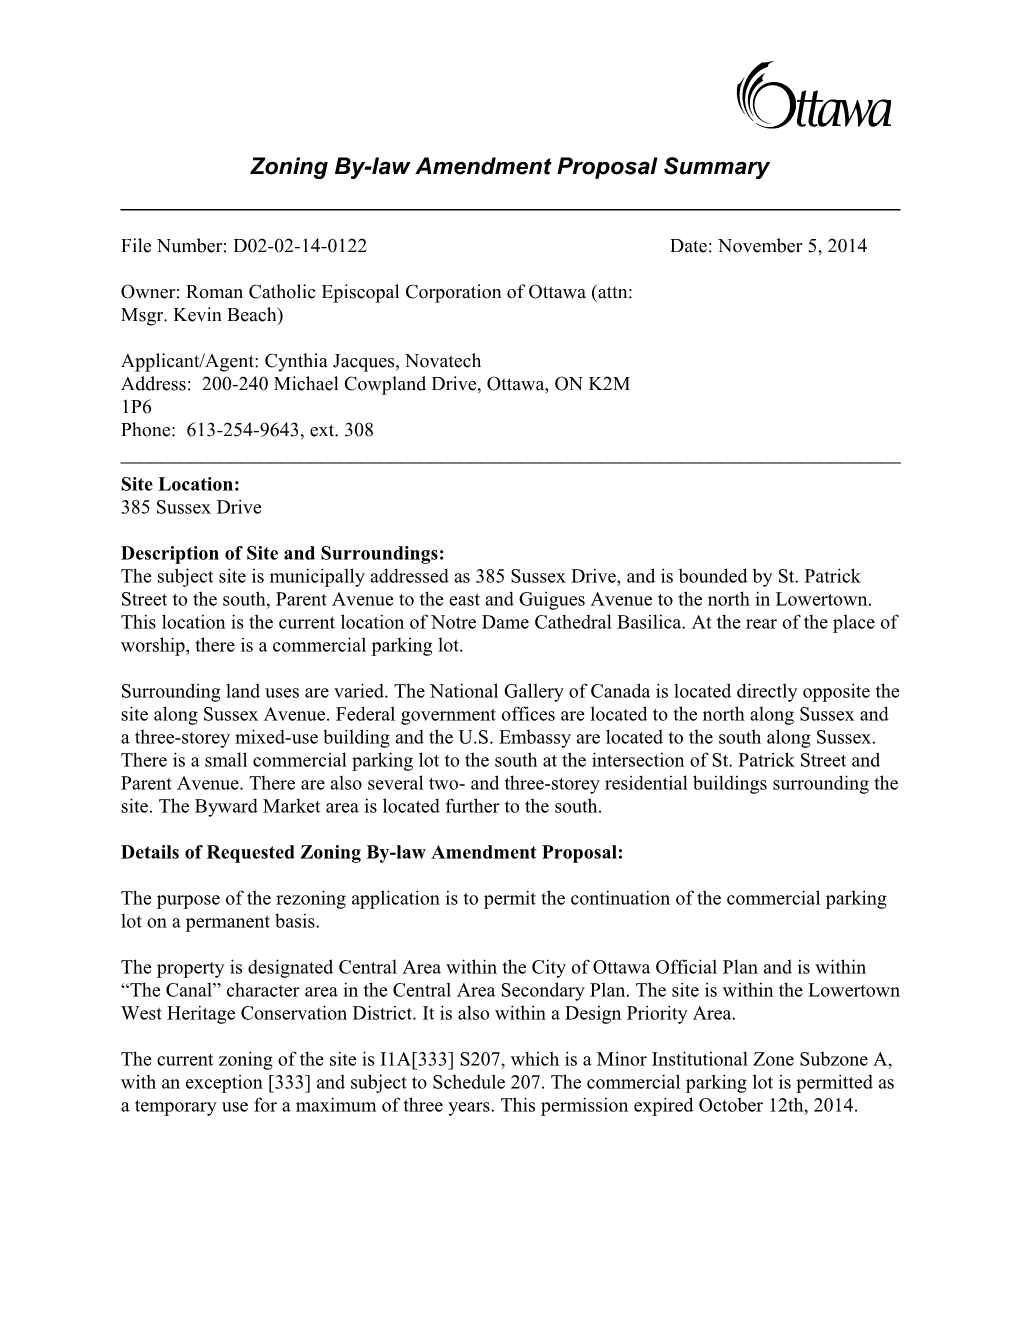 Zoning By-Law Amendment Proposal Summary s1